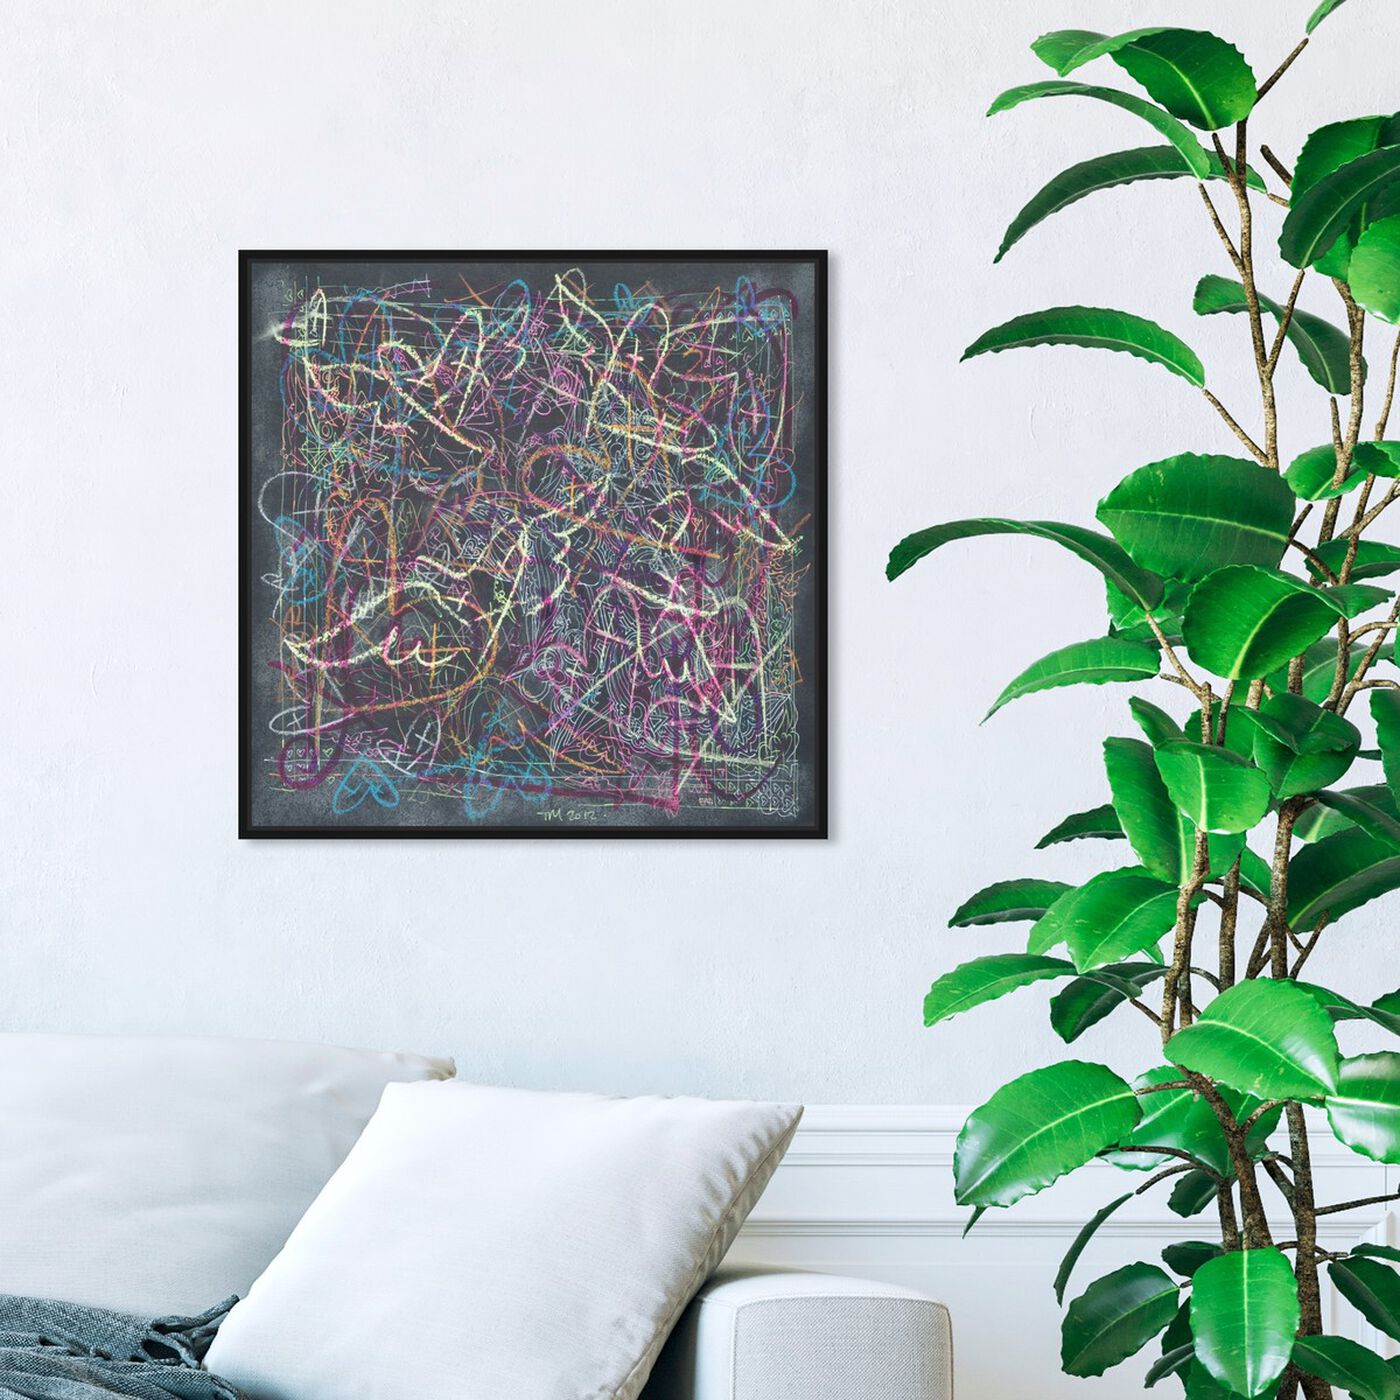 Hanging view of Mistura by Tiago Magro featuring abstract and textures art.